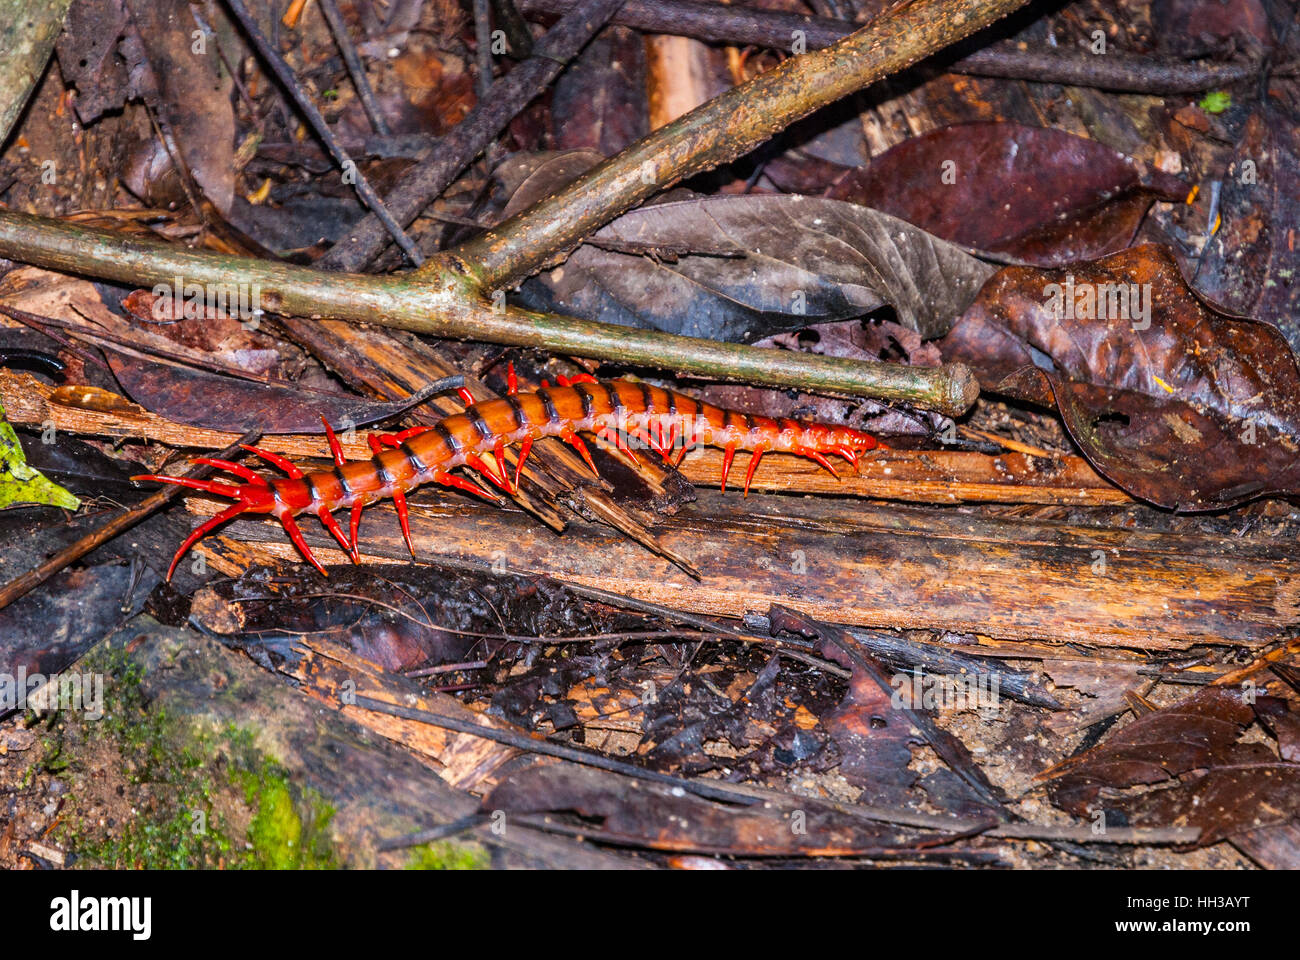 Cherry red centipede on ground in rainforest of Malaysia Stock Photo